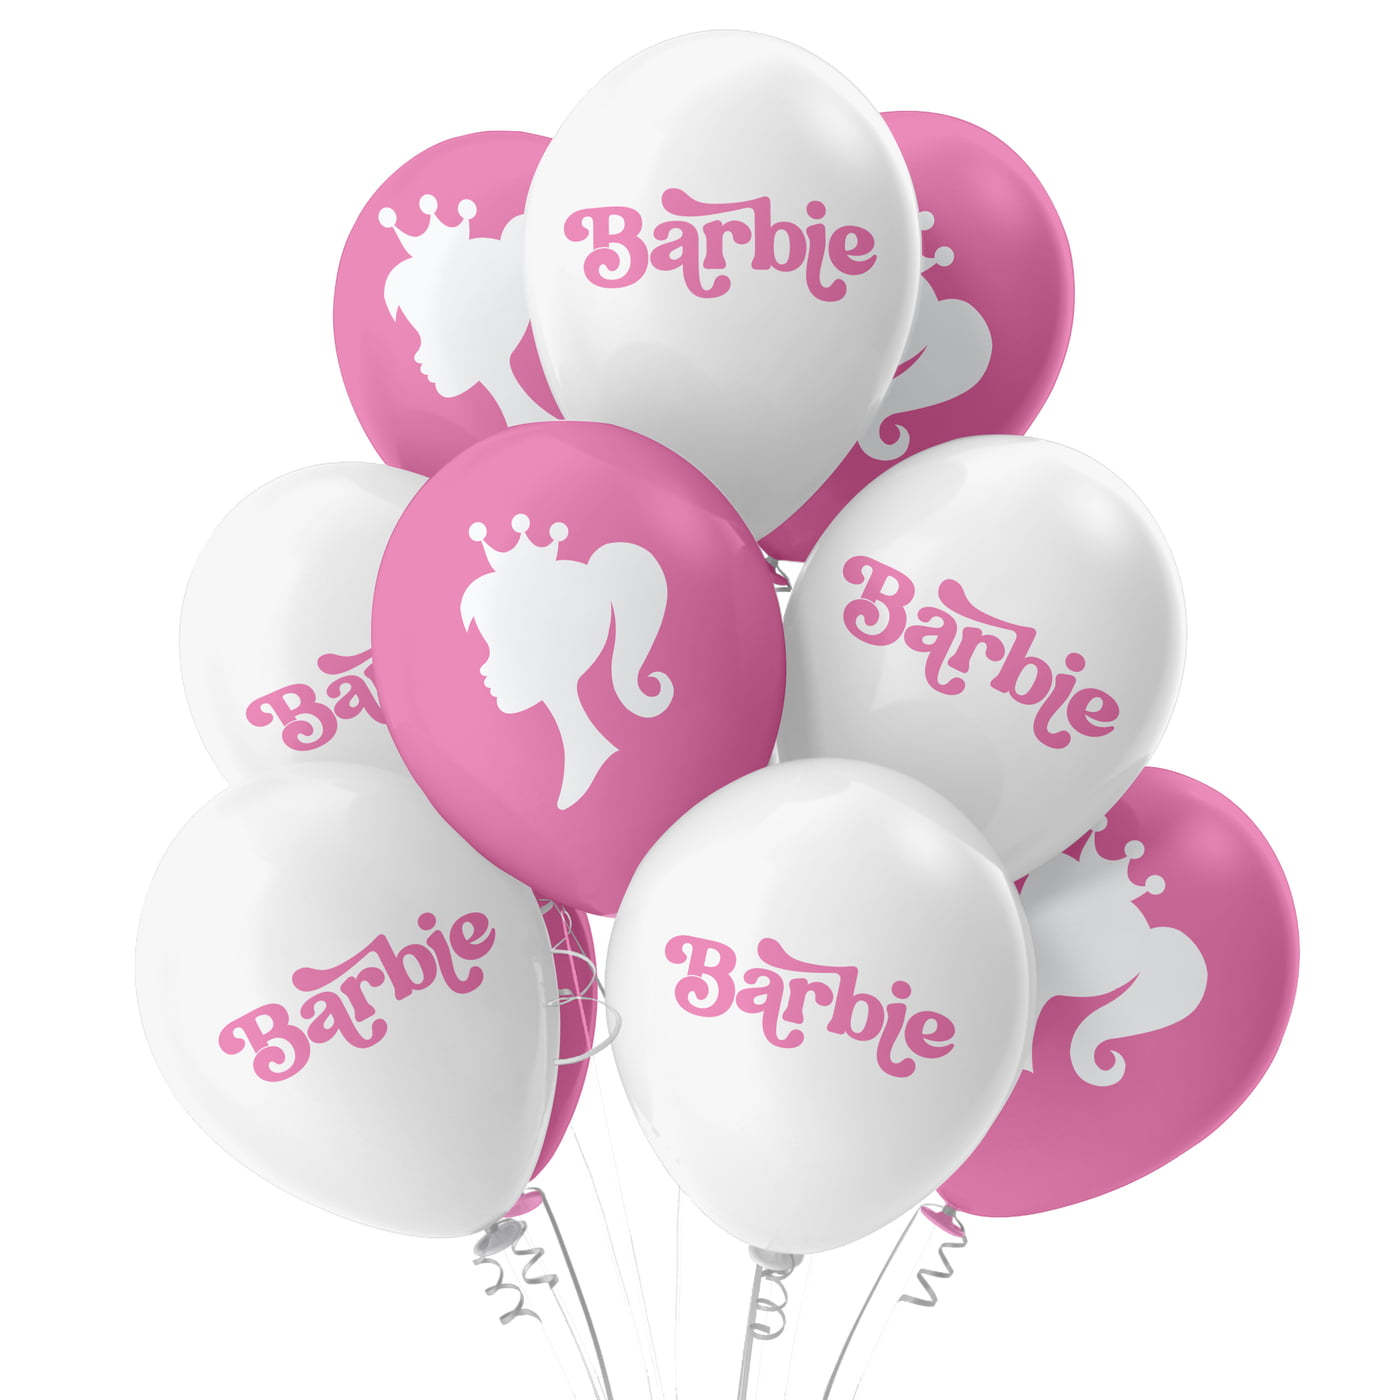 The Magic Balloons- Barbie Theme Balloons Latex Balloons For Barbie Theme Parties Pack of 21pcs 20pcs of Pink and White balloons And A Banner Party Supplier For Birthday.